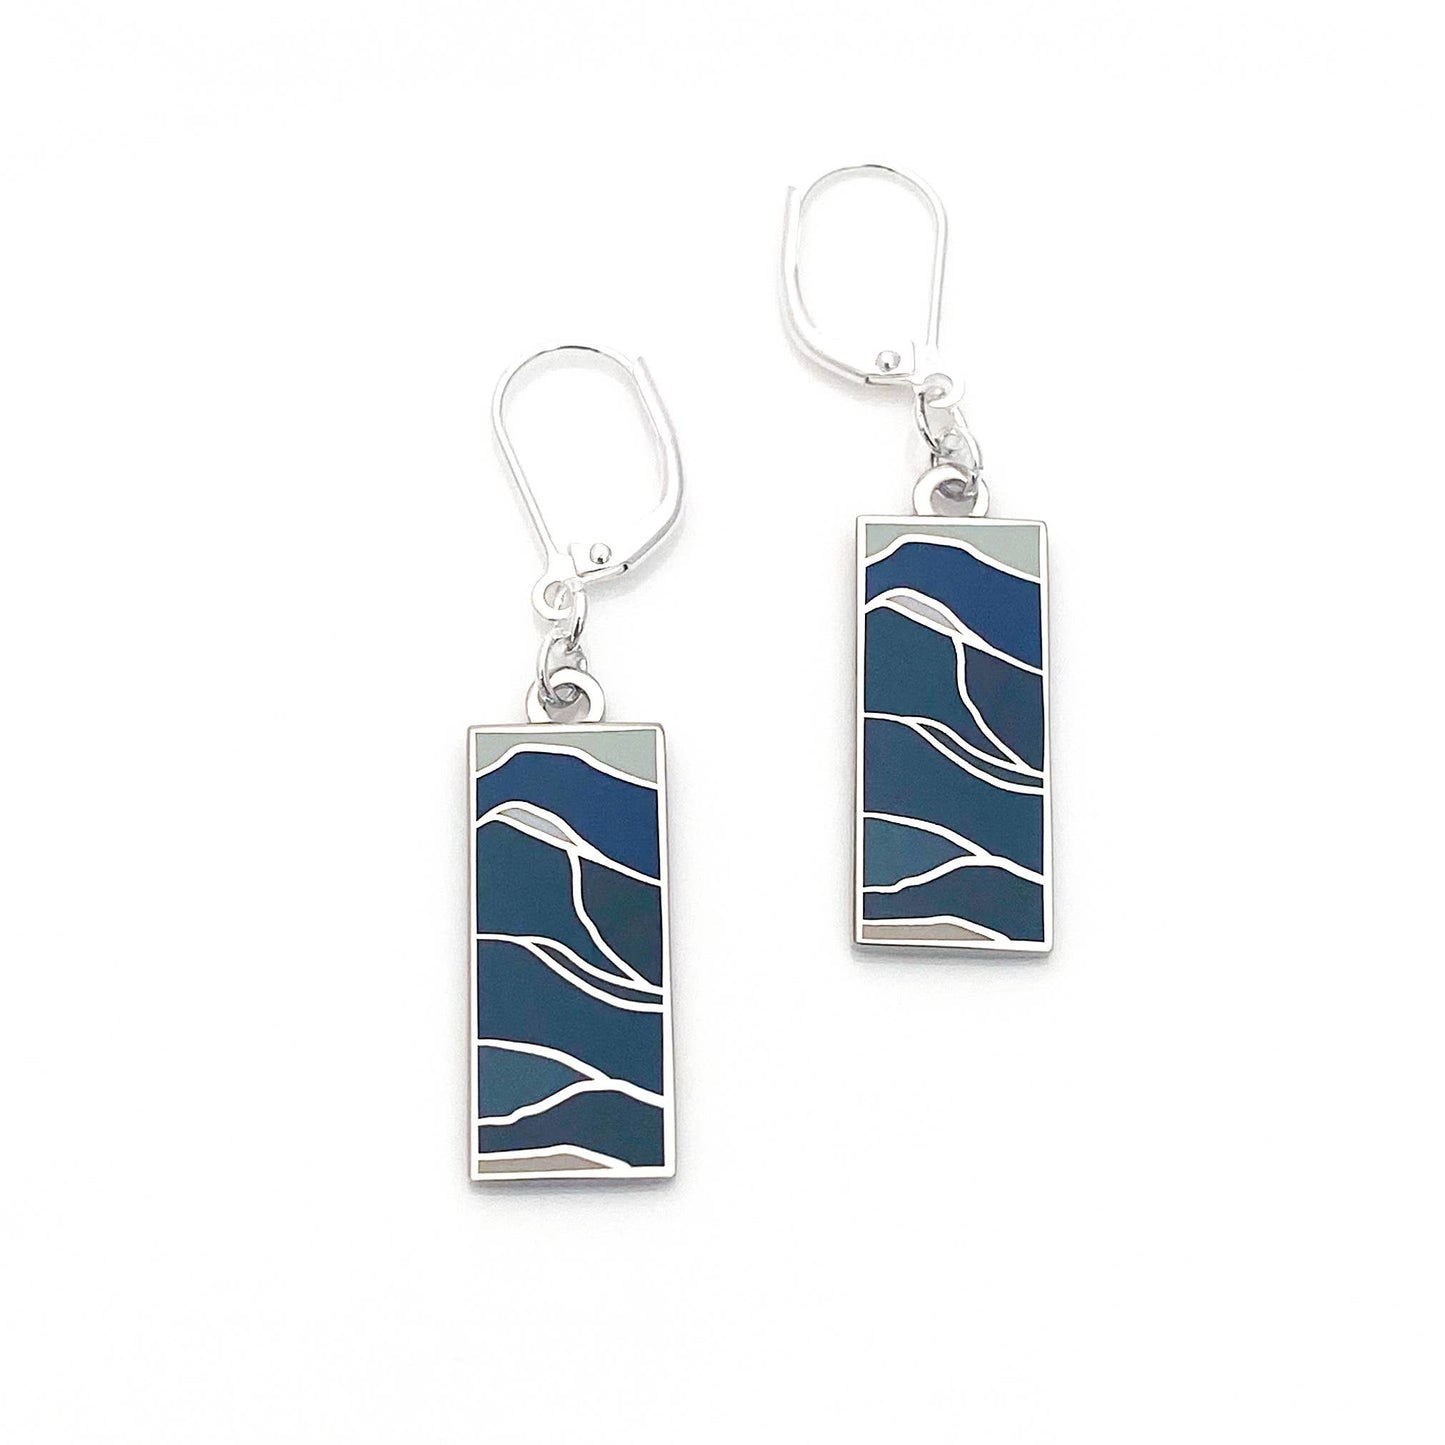 Square earrings with a waves of blue enamel